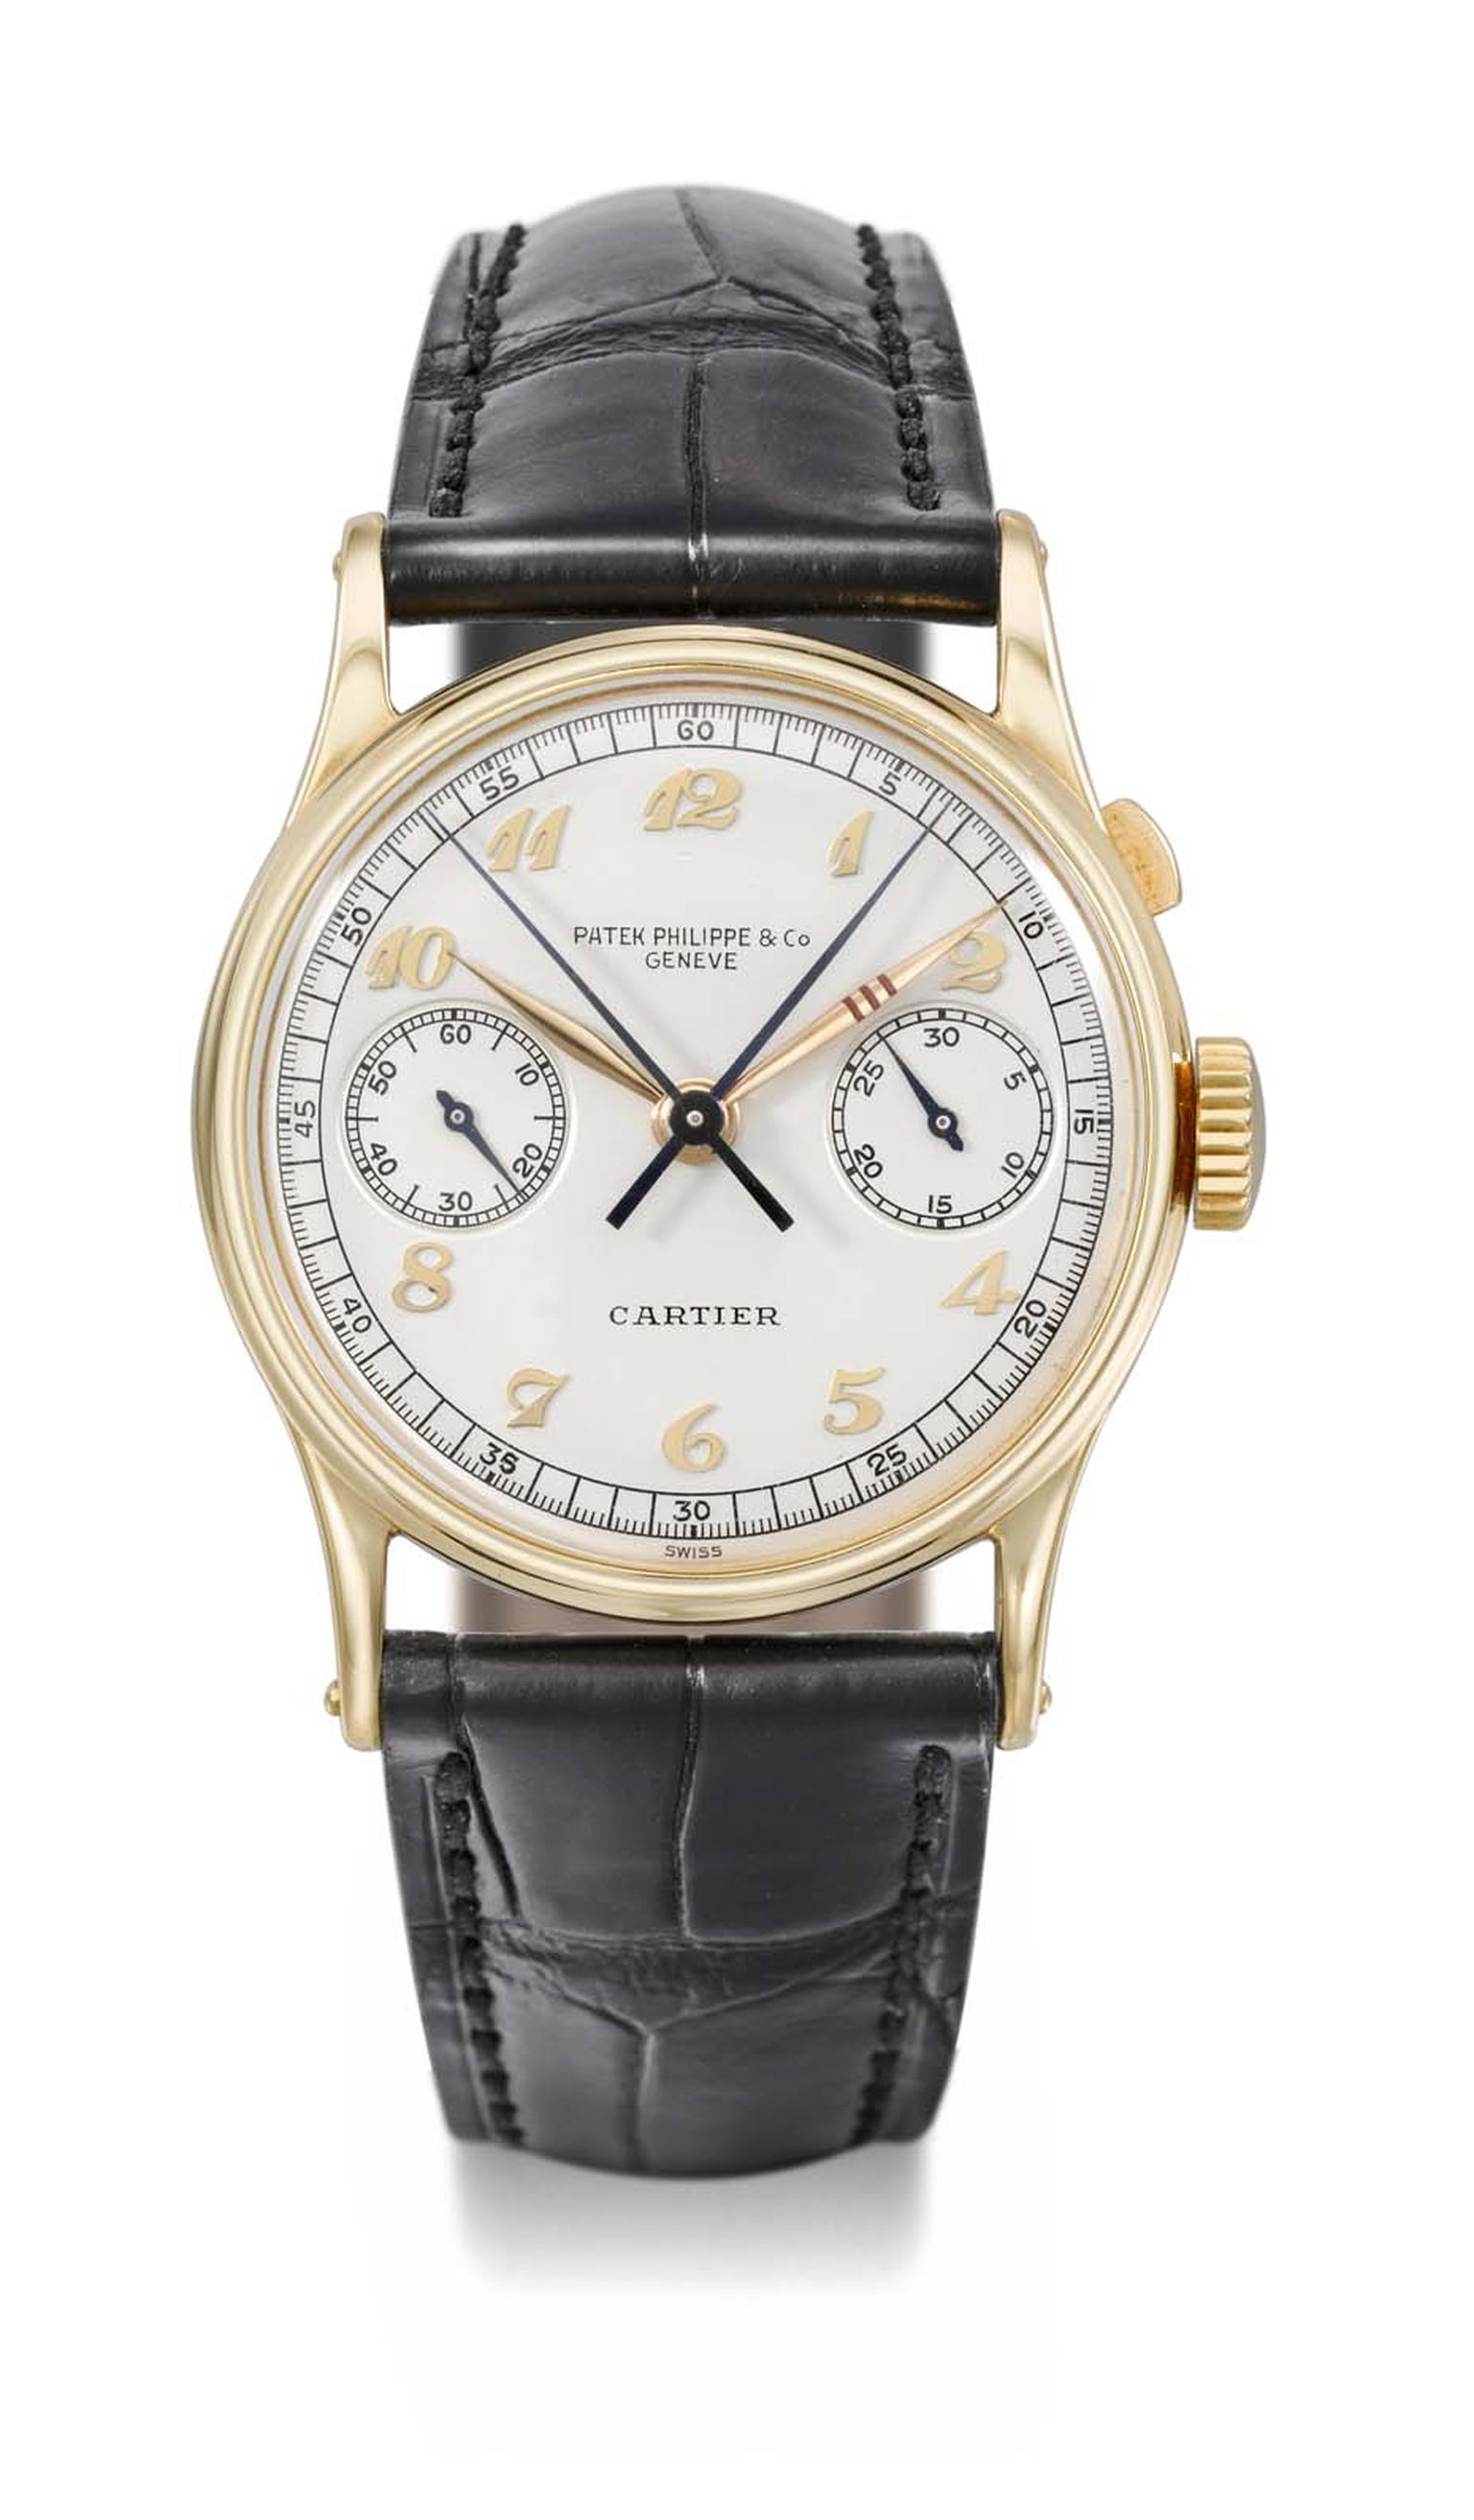 Christie’s auction will include the Patek Philippe watch “The Boeing” Reference 130, a rare gold wristwatch with a split-seconds chronograph.